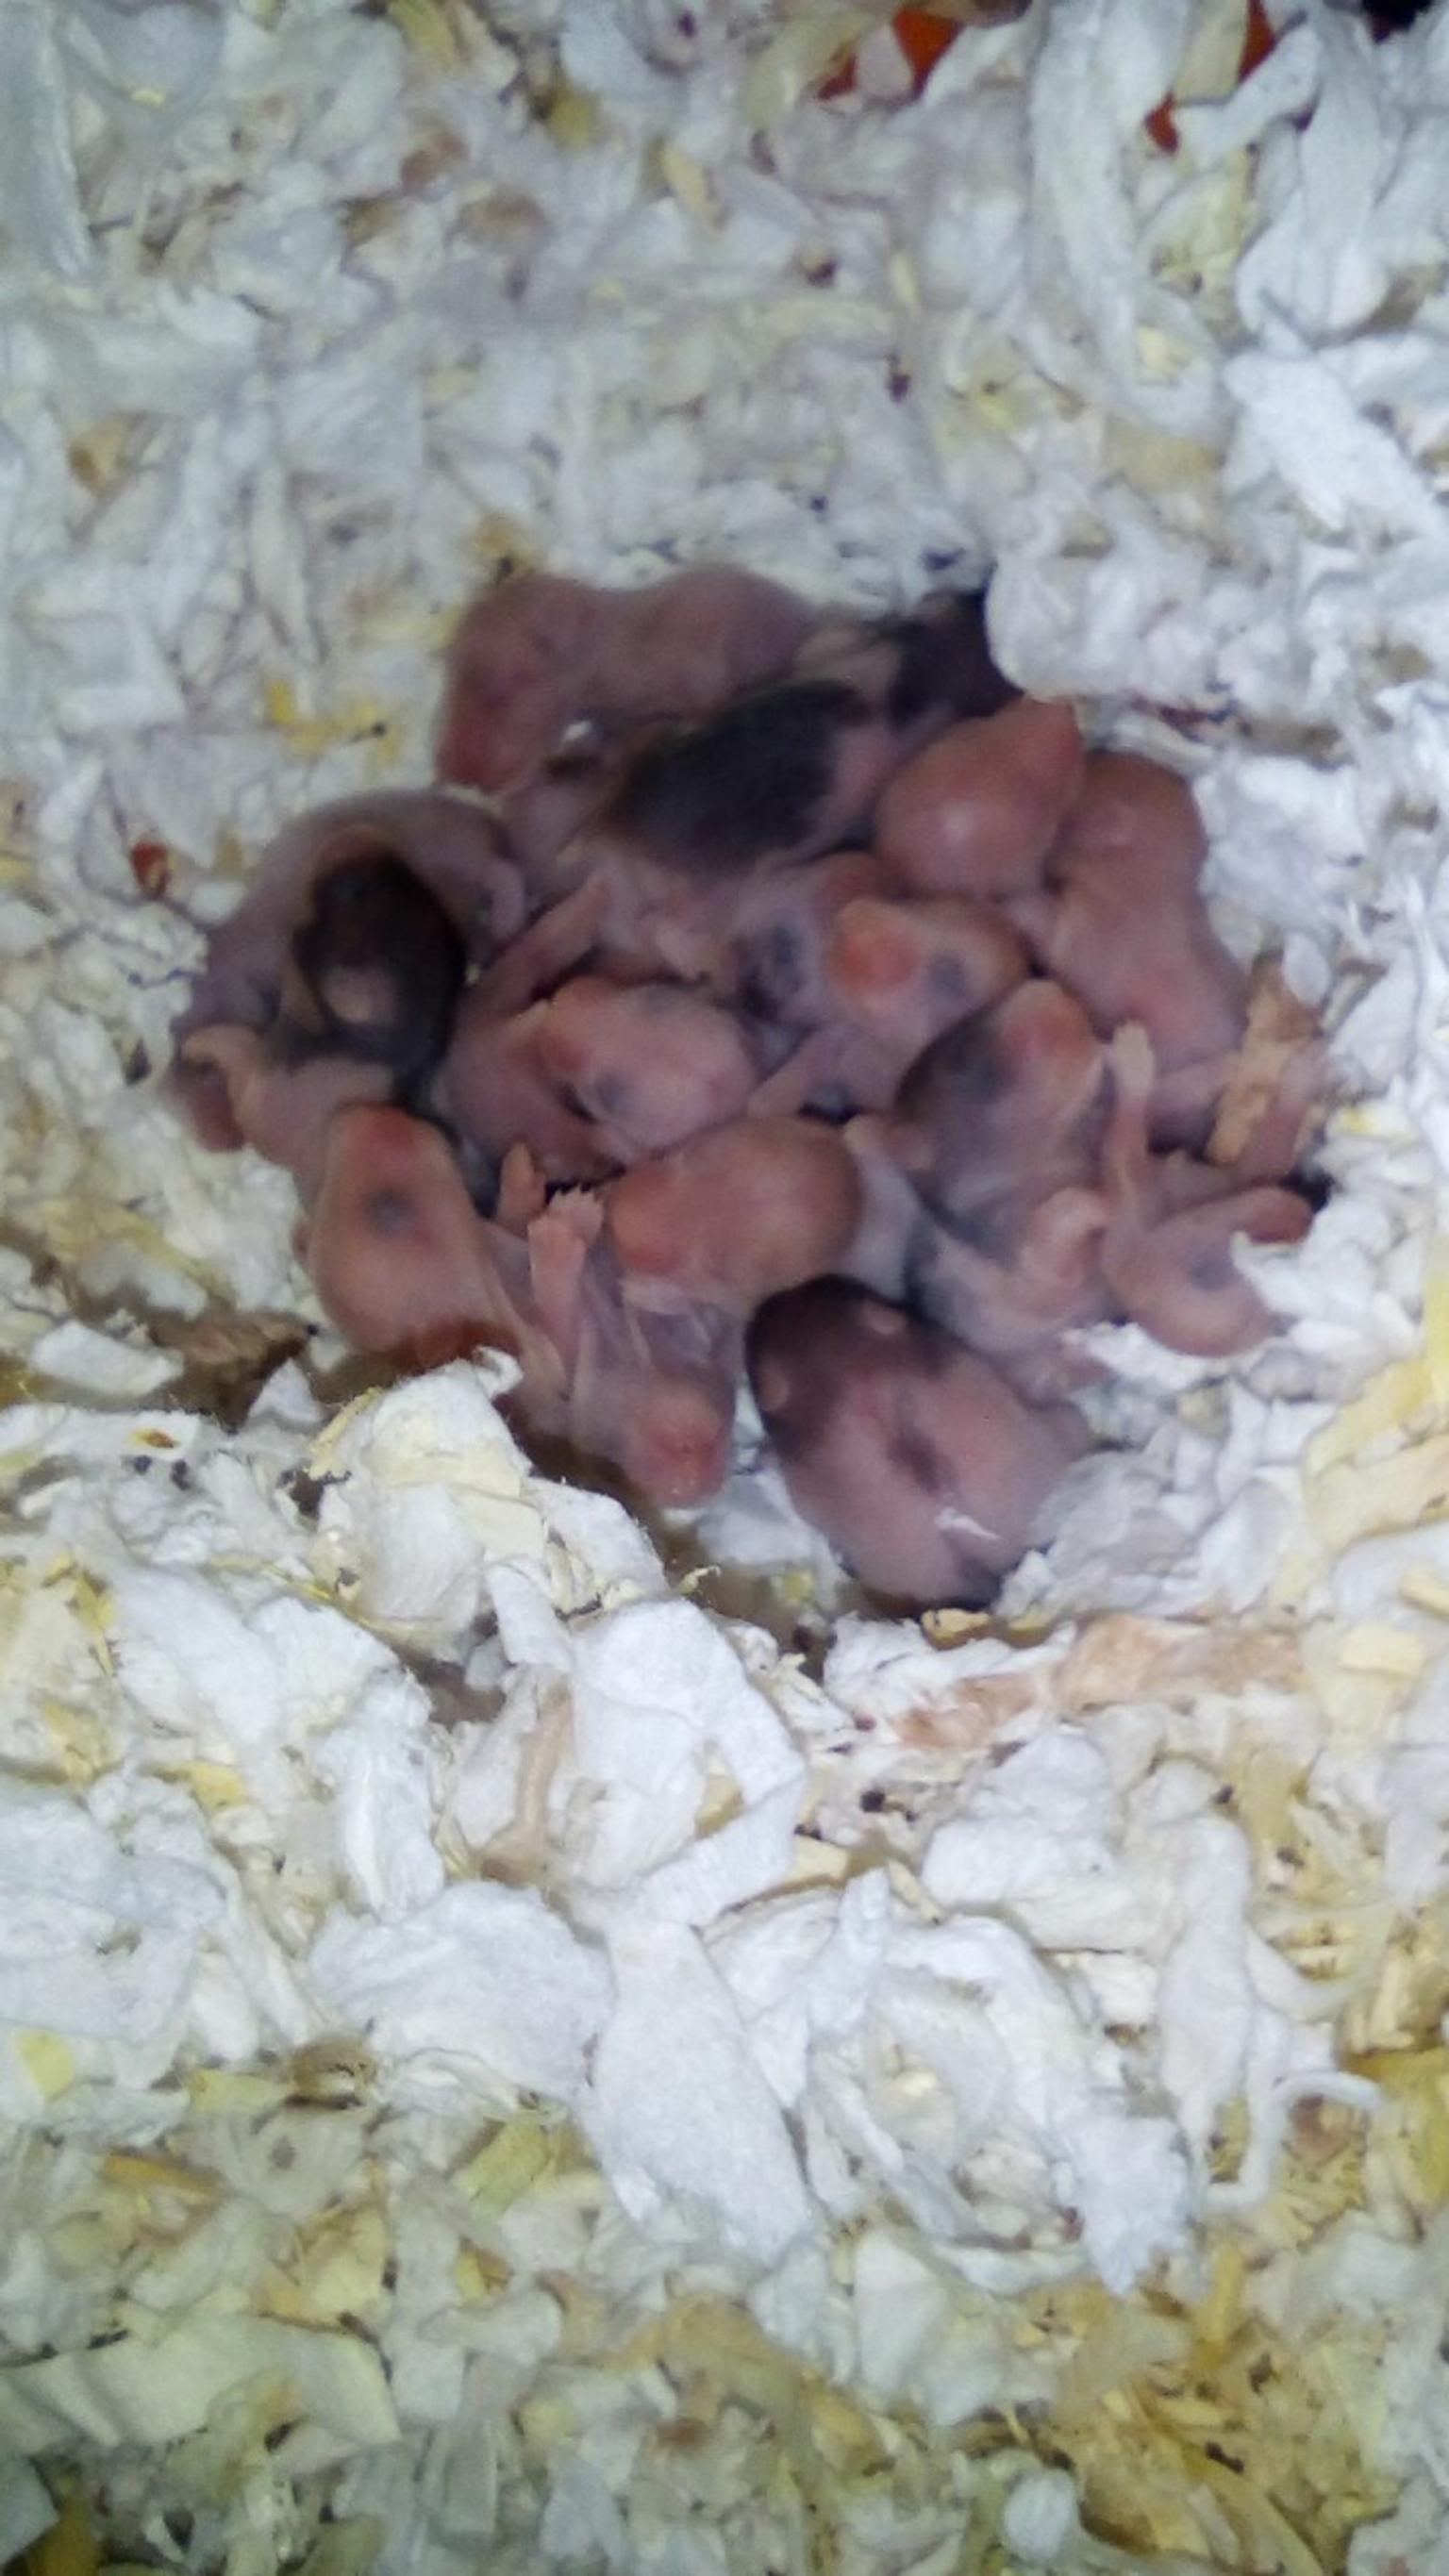 Baby Syrian Hamsters In Ol2 Oldham For 7 00 For Sale Shpock,Bbq Pork Ribs Recipe